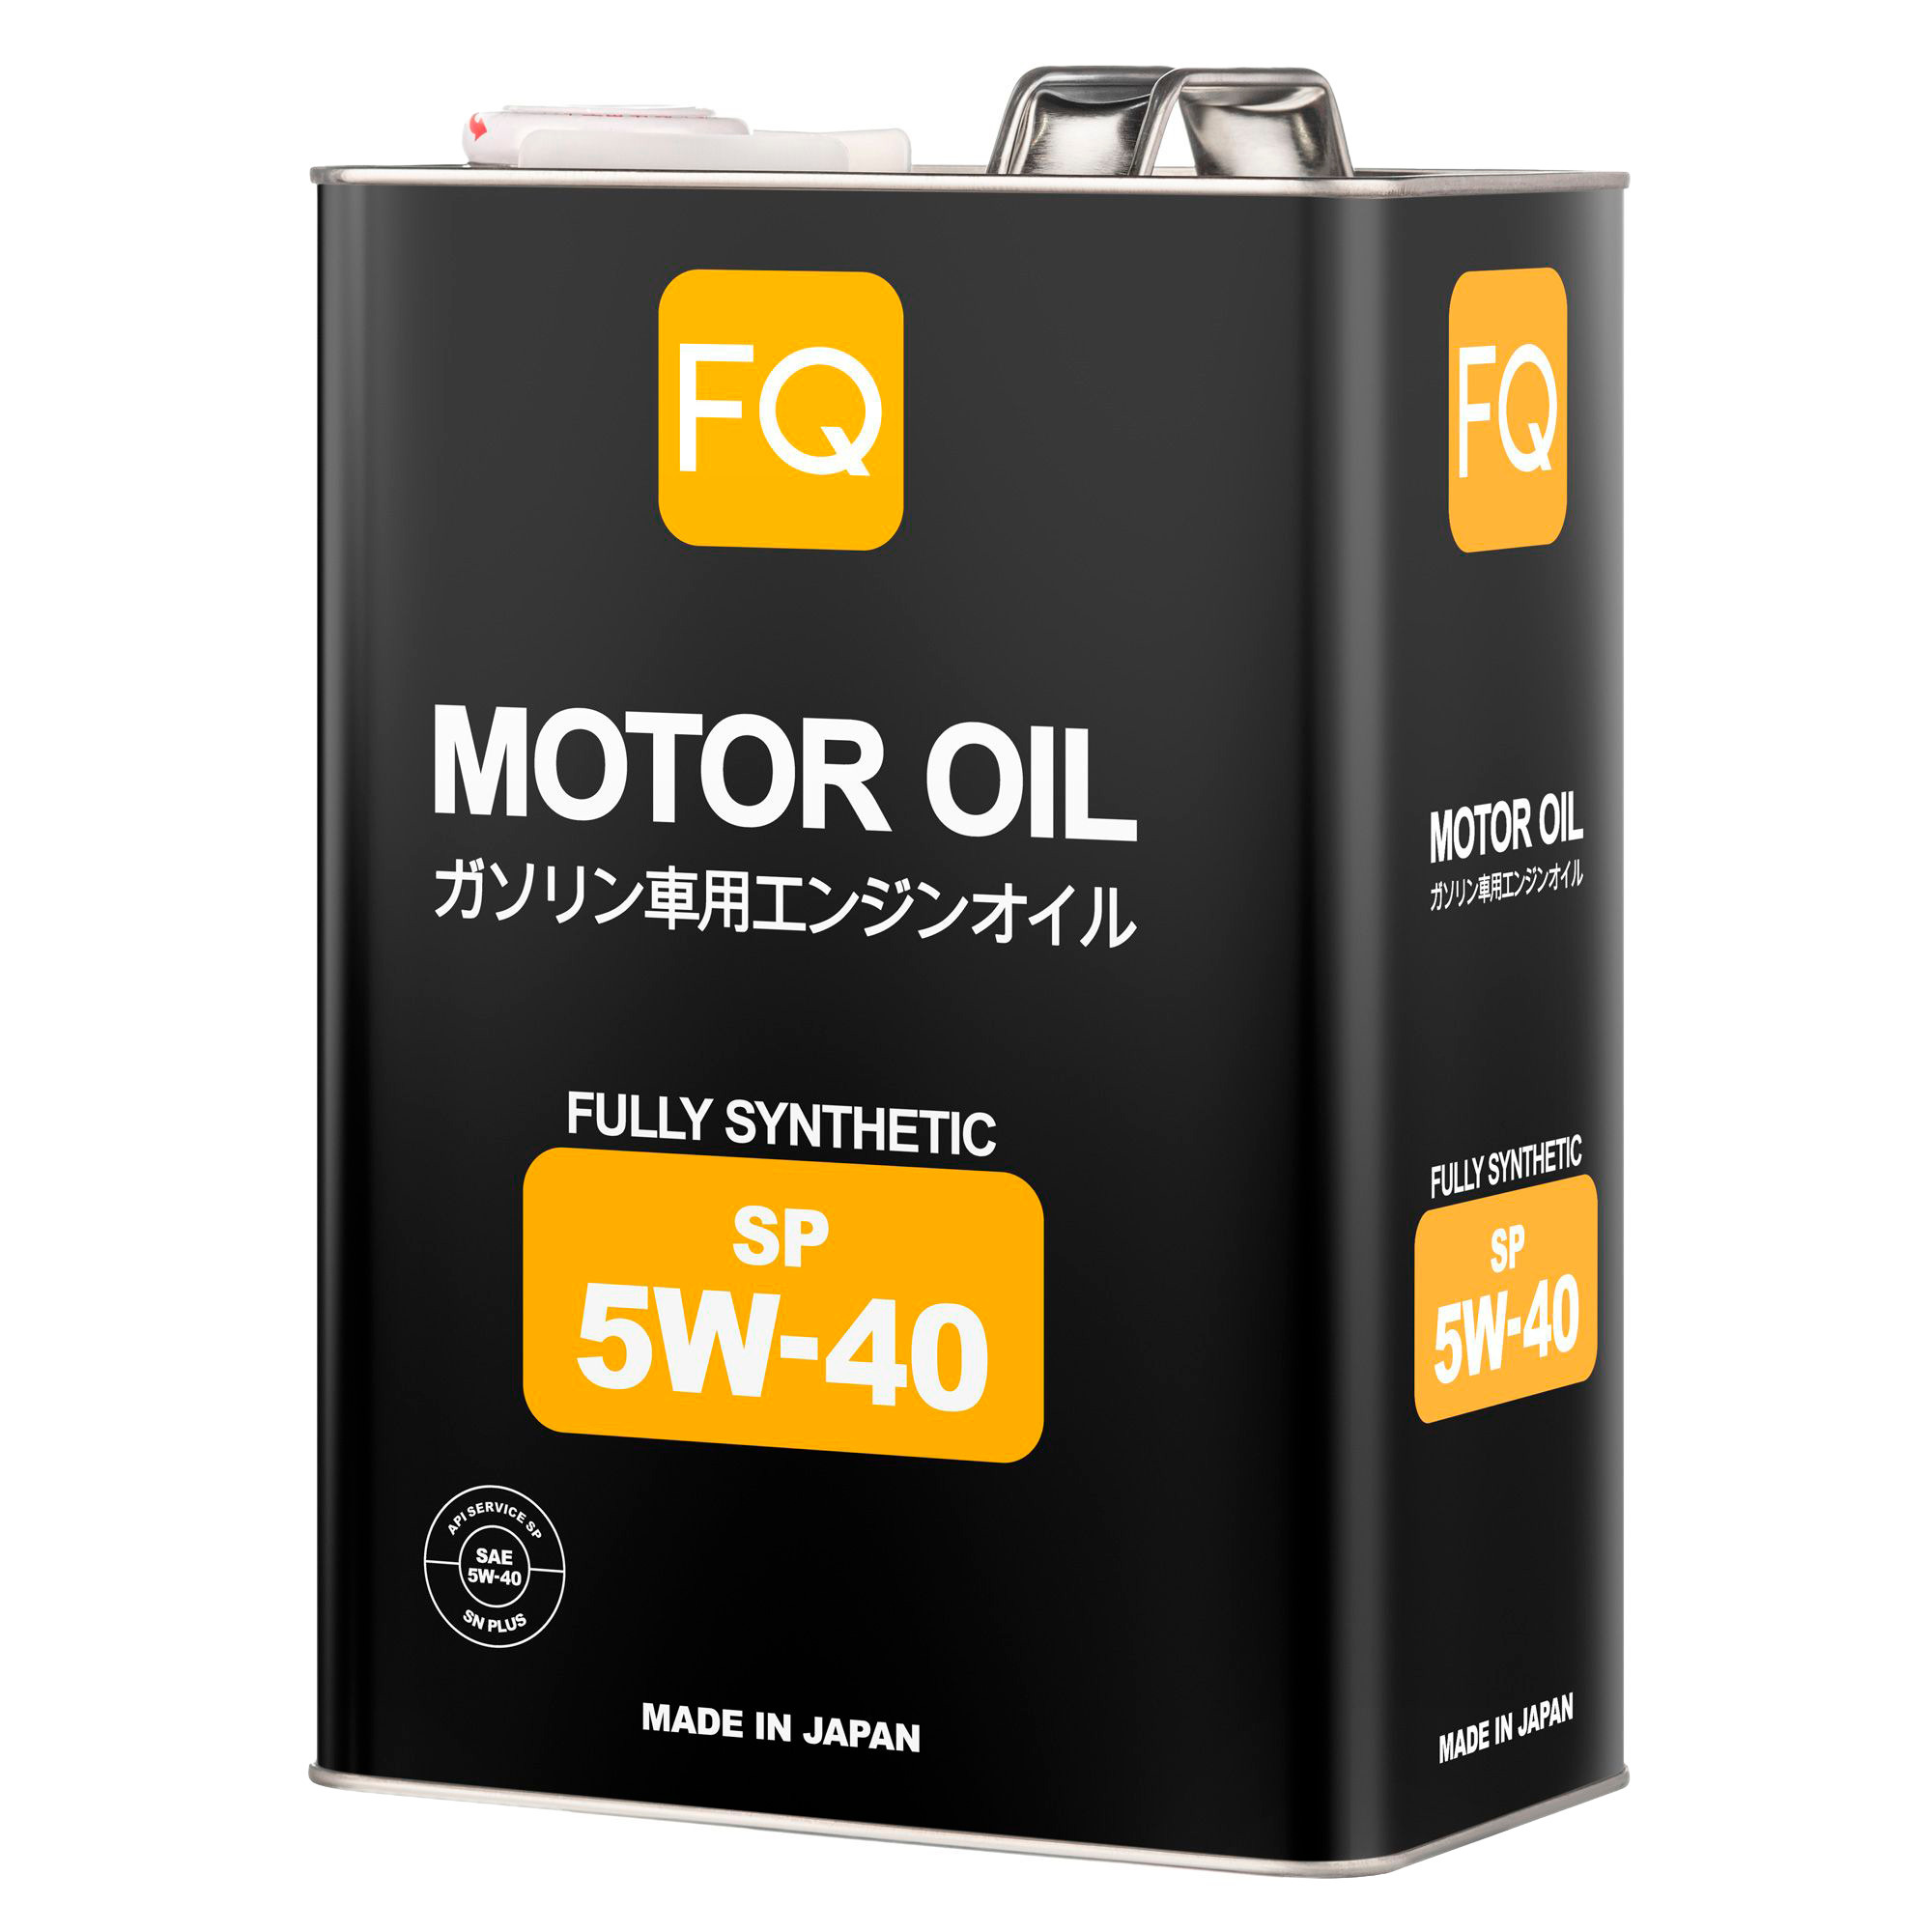 FQ Масло Моторное Fully Synthetic 5w-40 4л